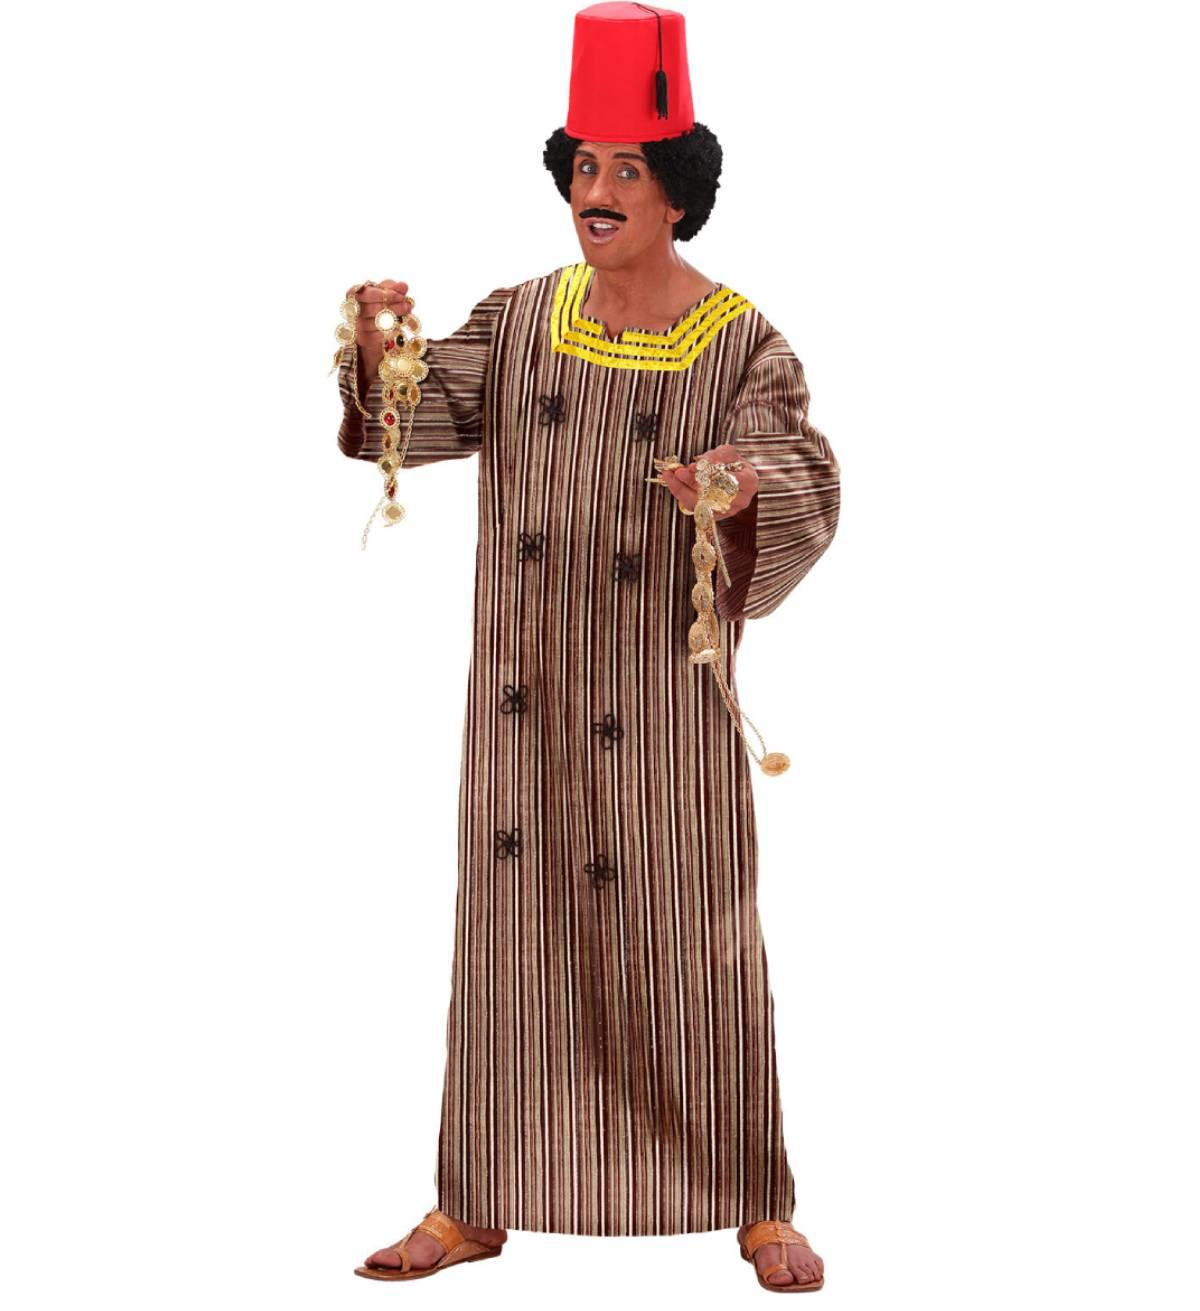 Moroccan Man costume consisting of robe and fez, by Widmann 5918 available here at Karnival Costumes online party shop